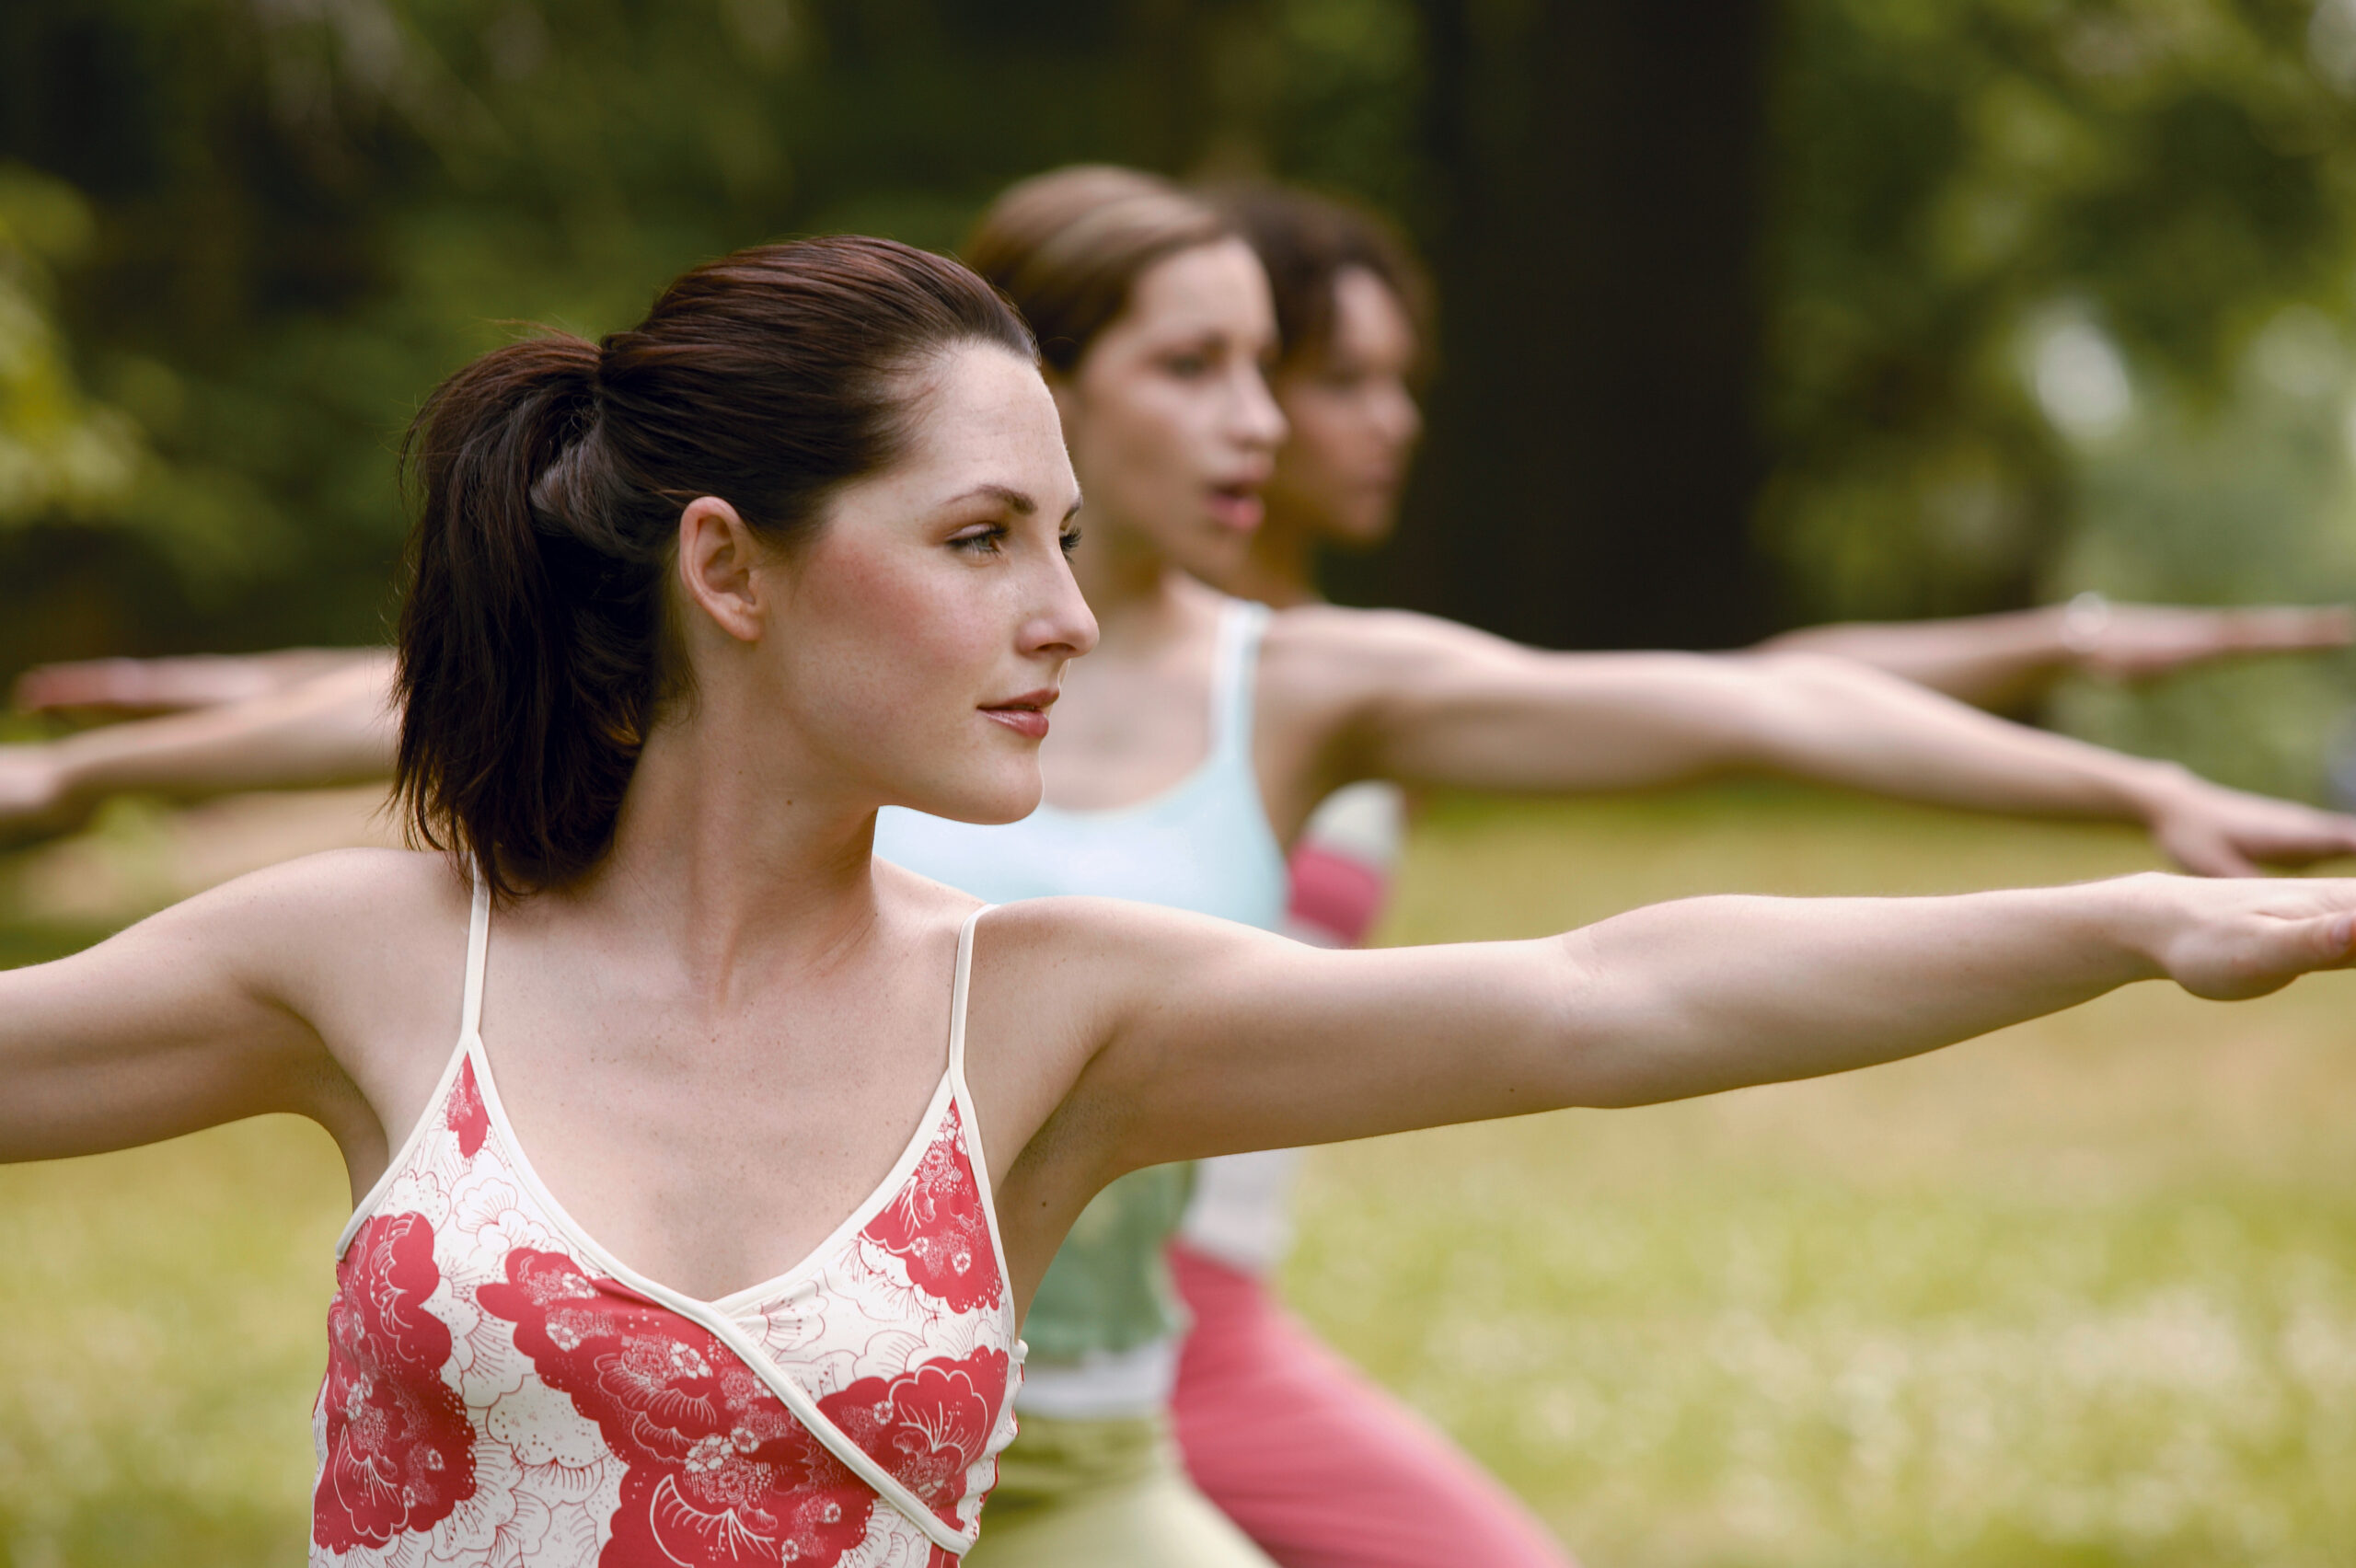 women doing warrior pose while yoga training - learn kung fu online